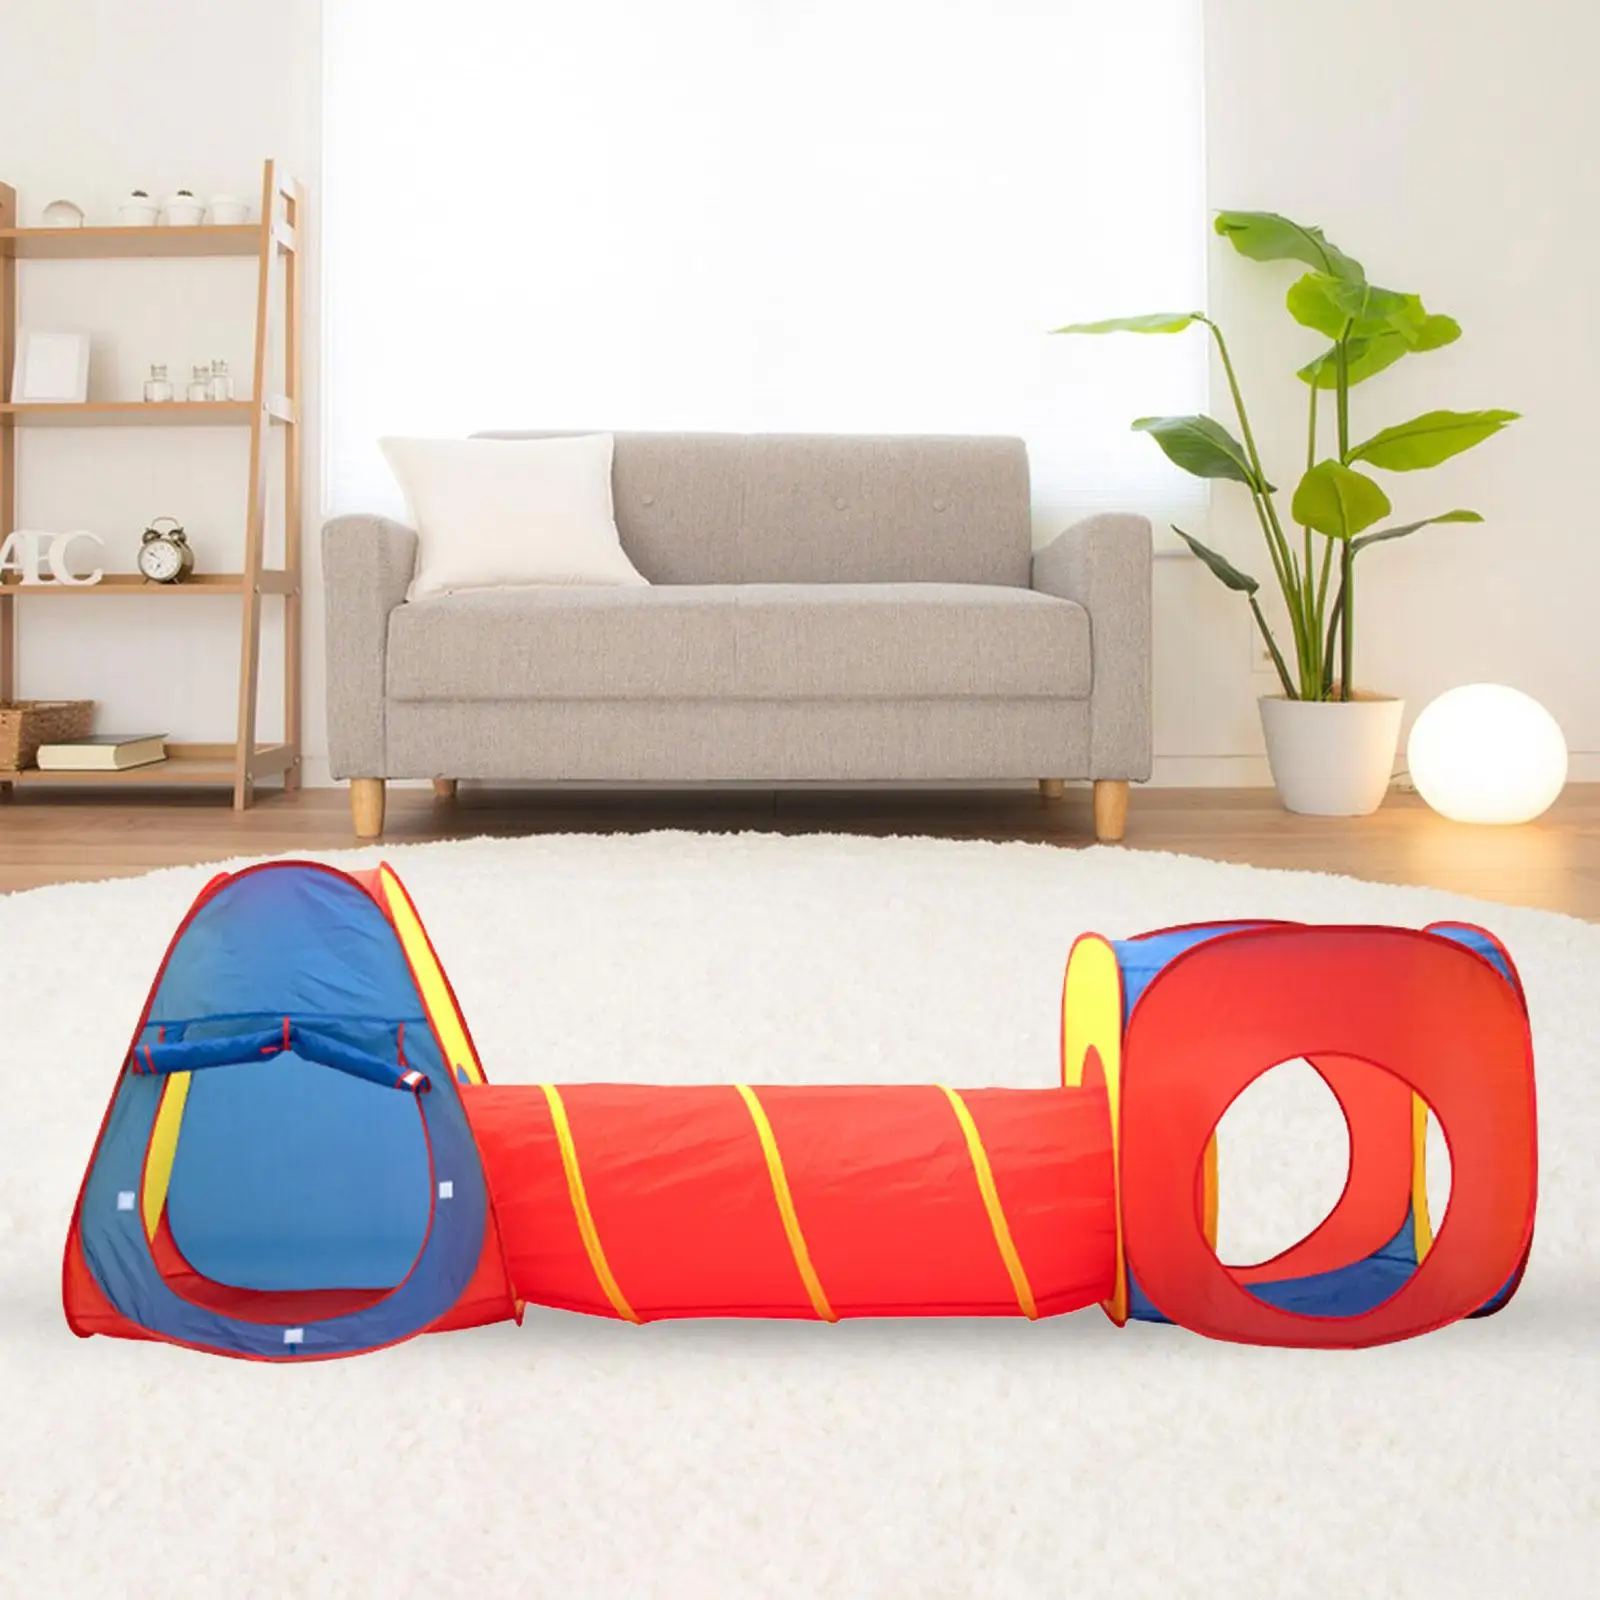 Kids Play Tents with Tunnels Baby Crawl Tunnels for Playground, Parties